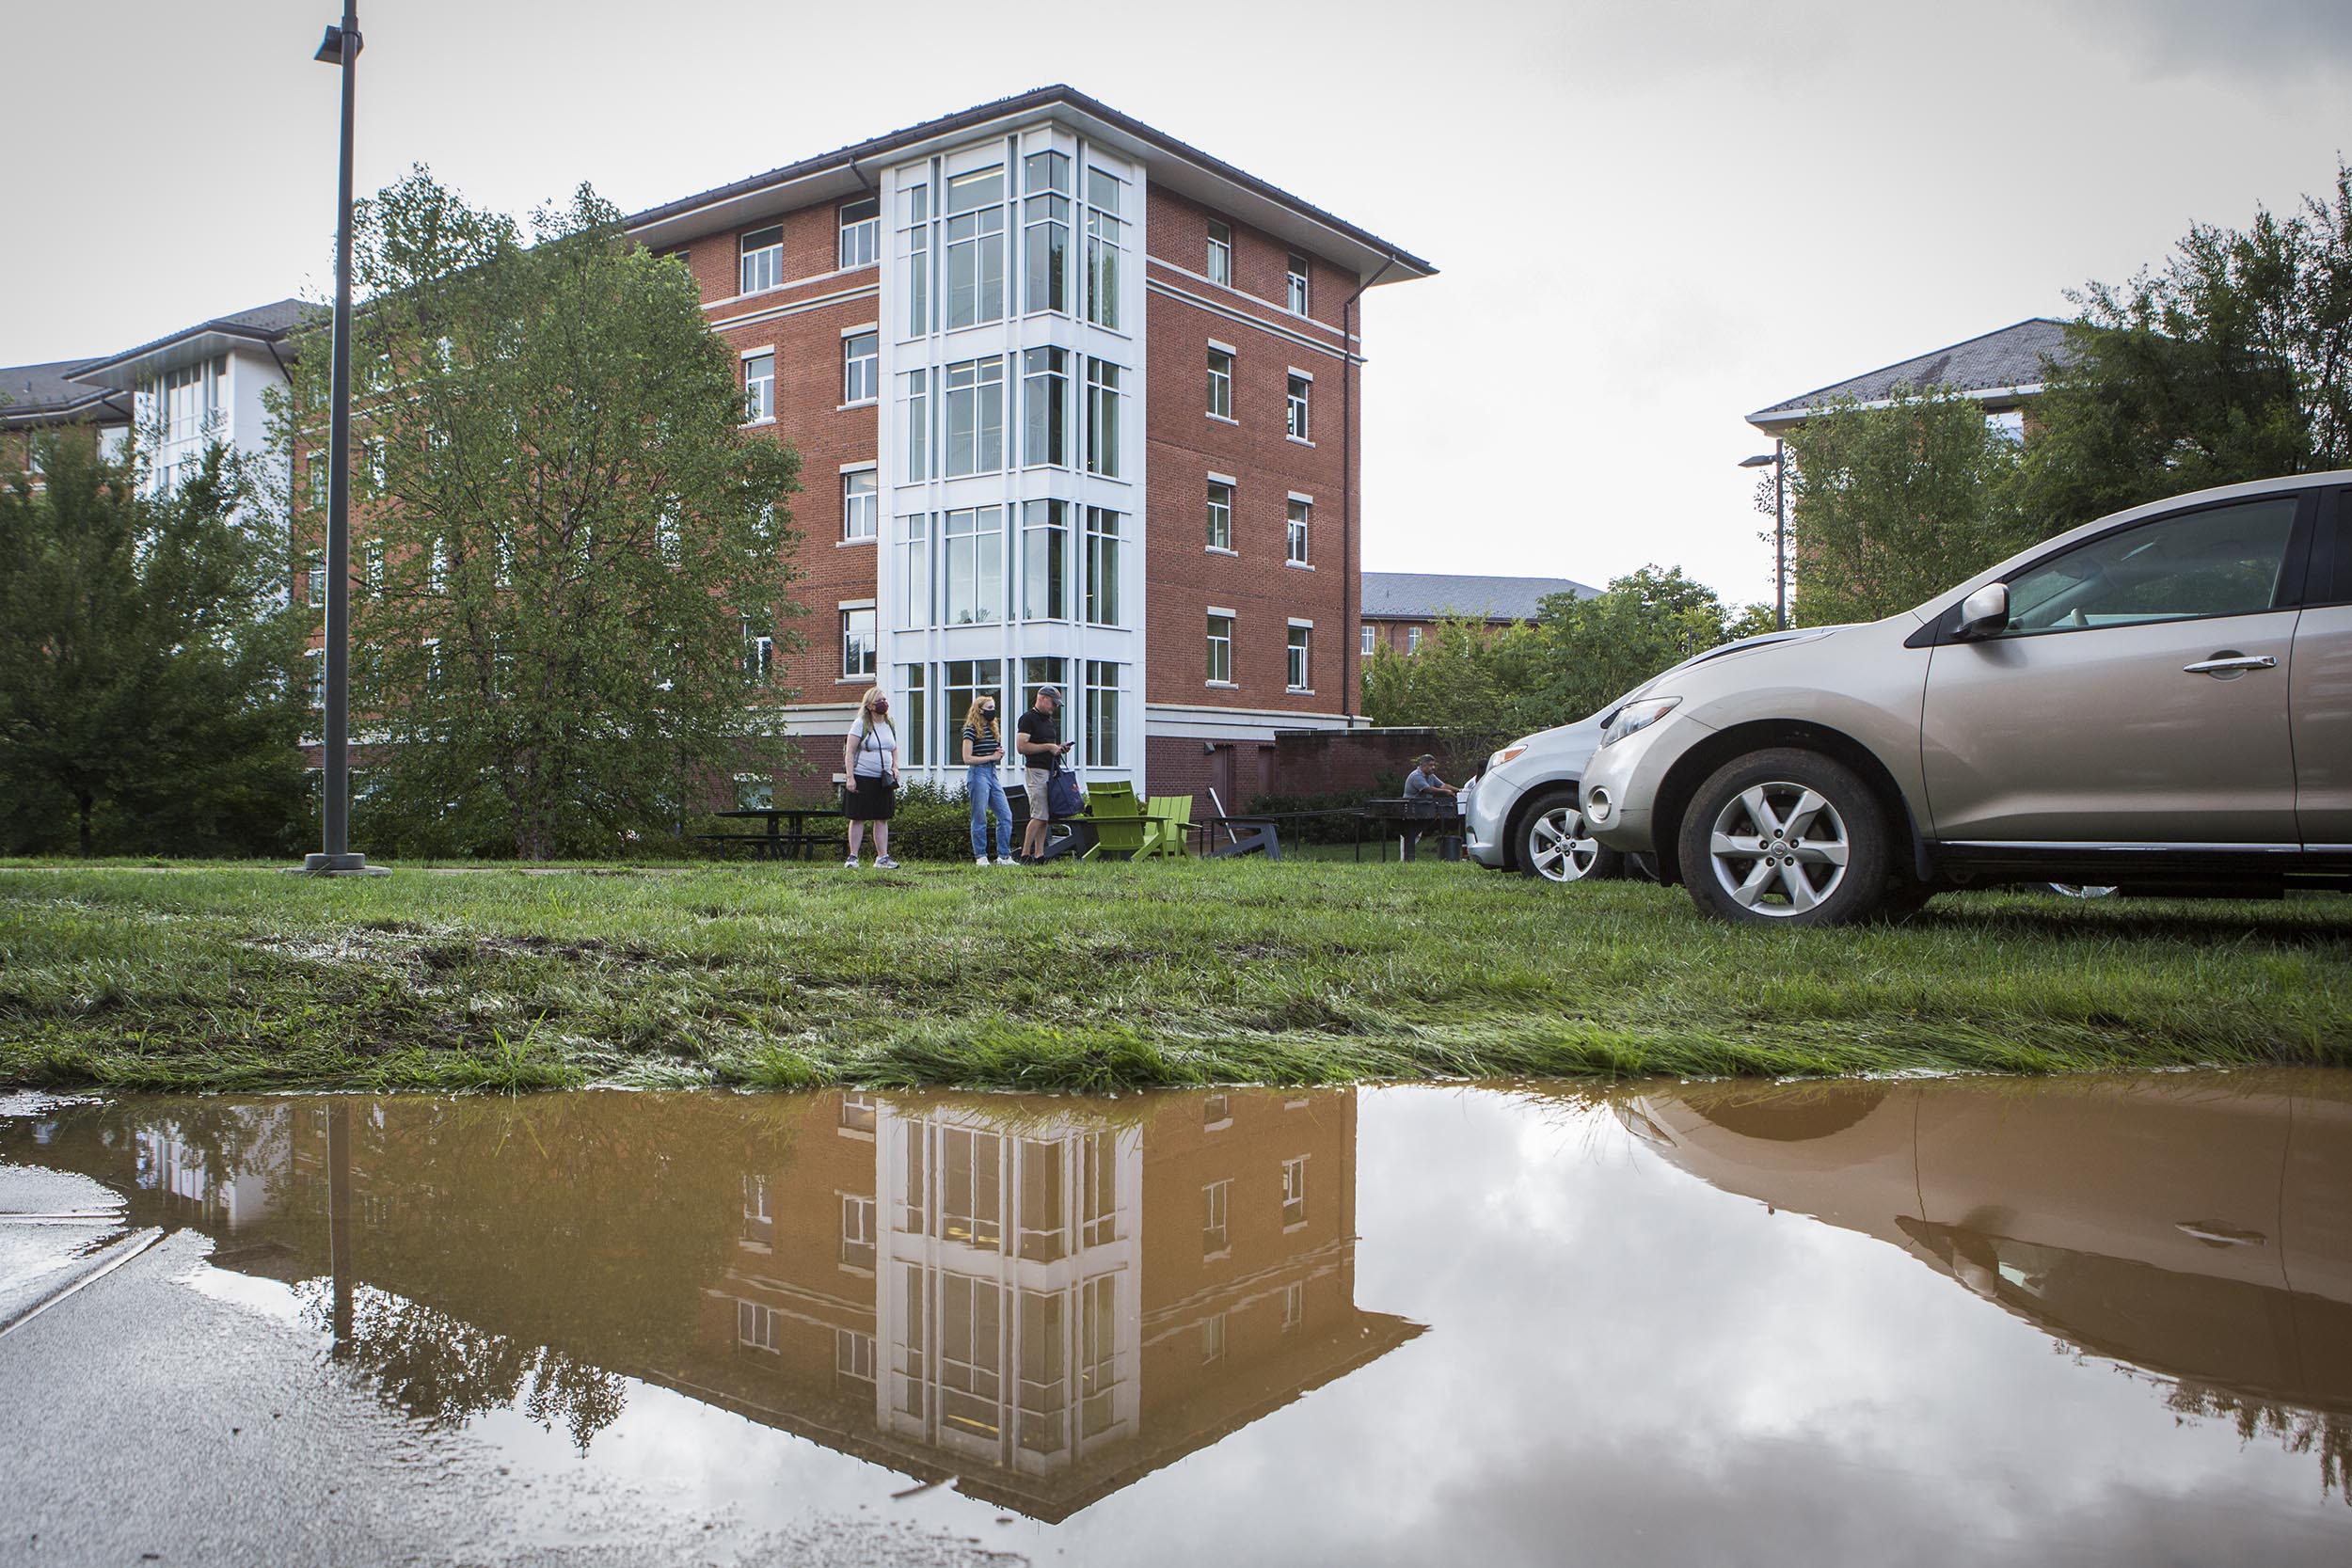 Muddy water puddle in front of a dorm